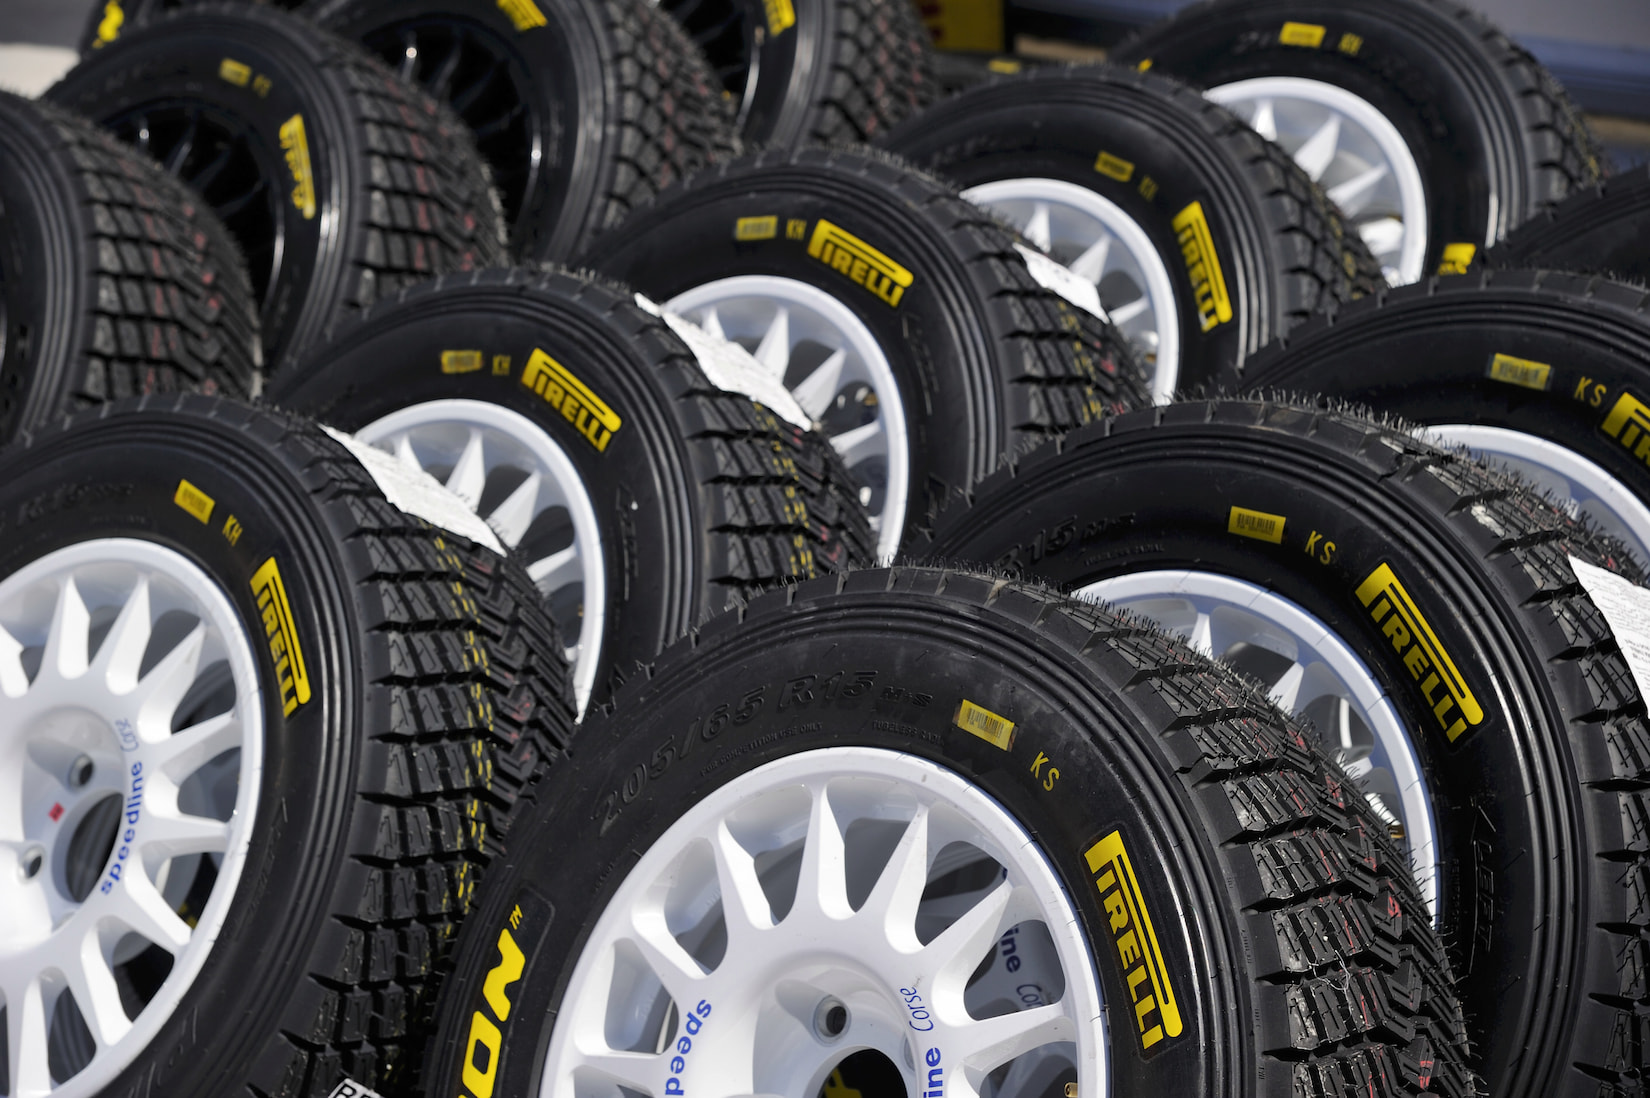 Tire service during sports events and competitions - Pirelli service truck